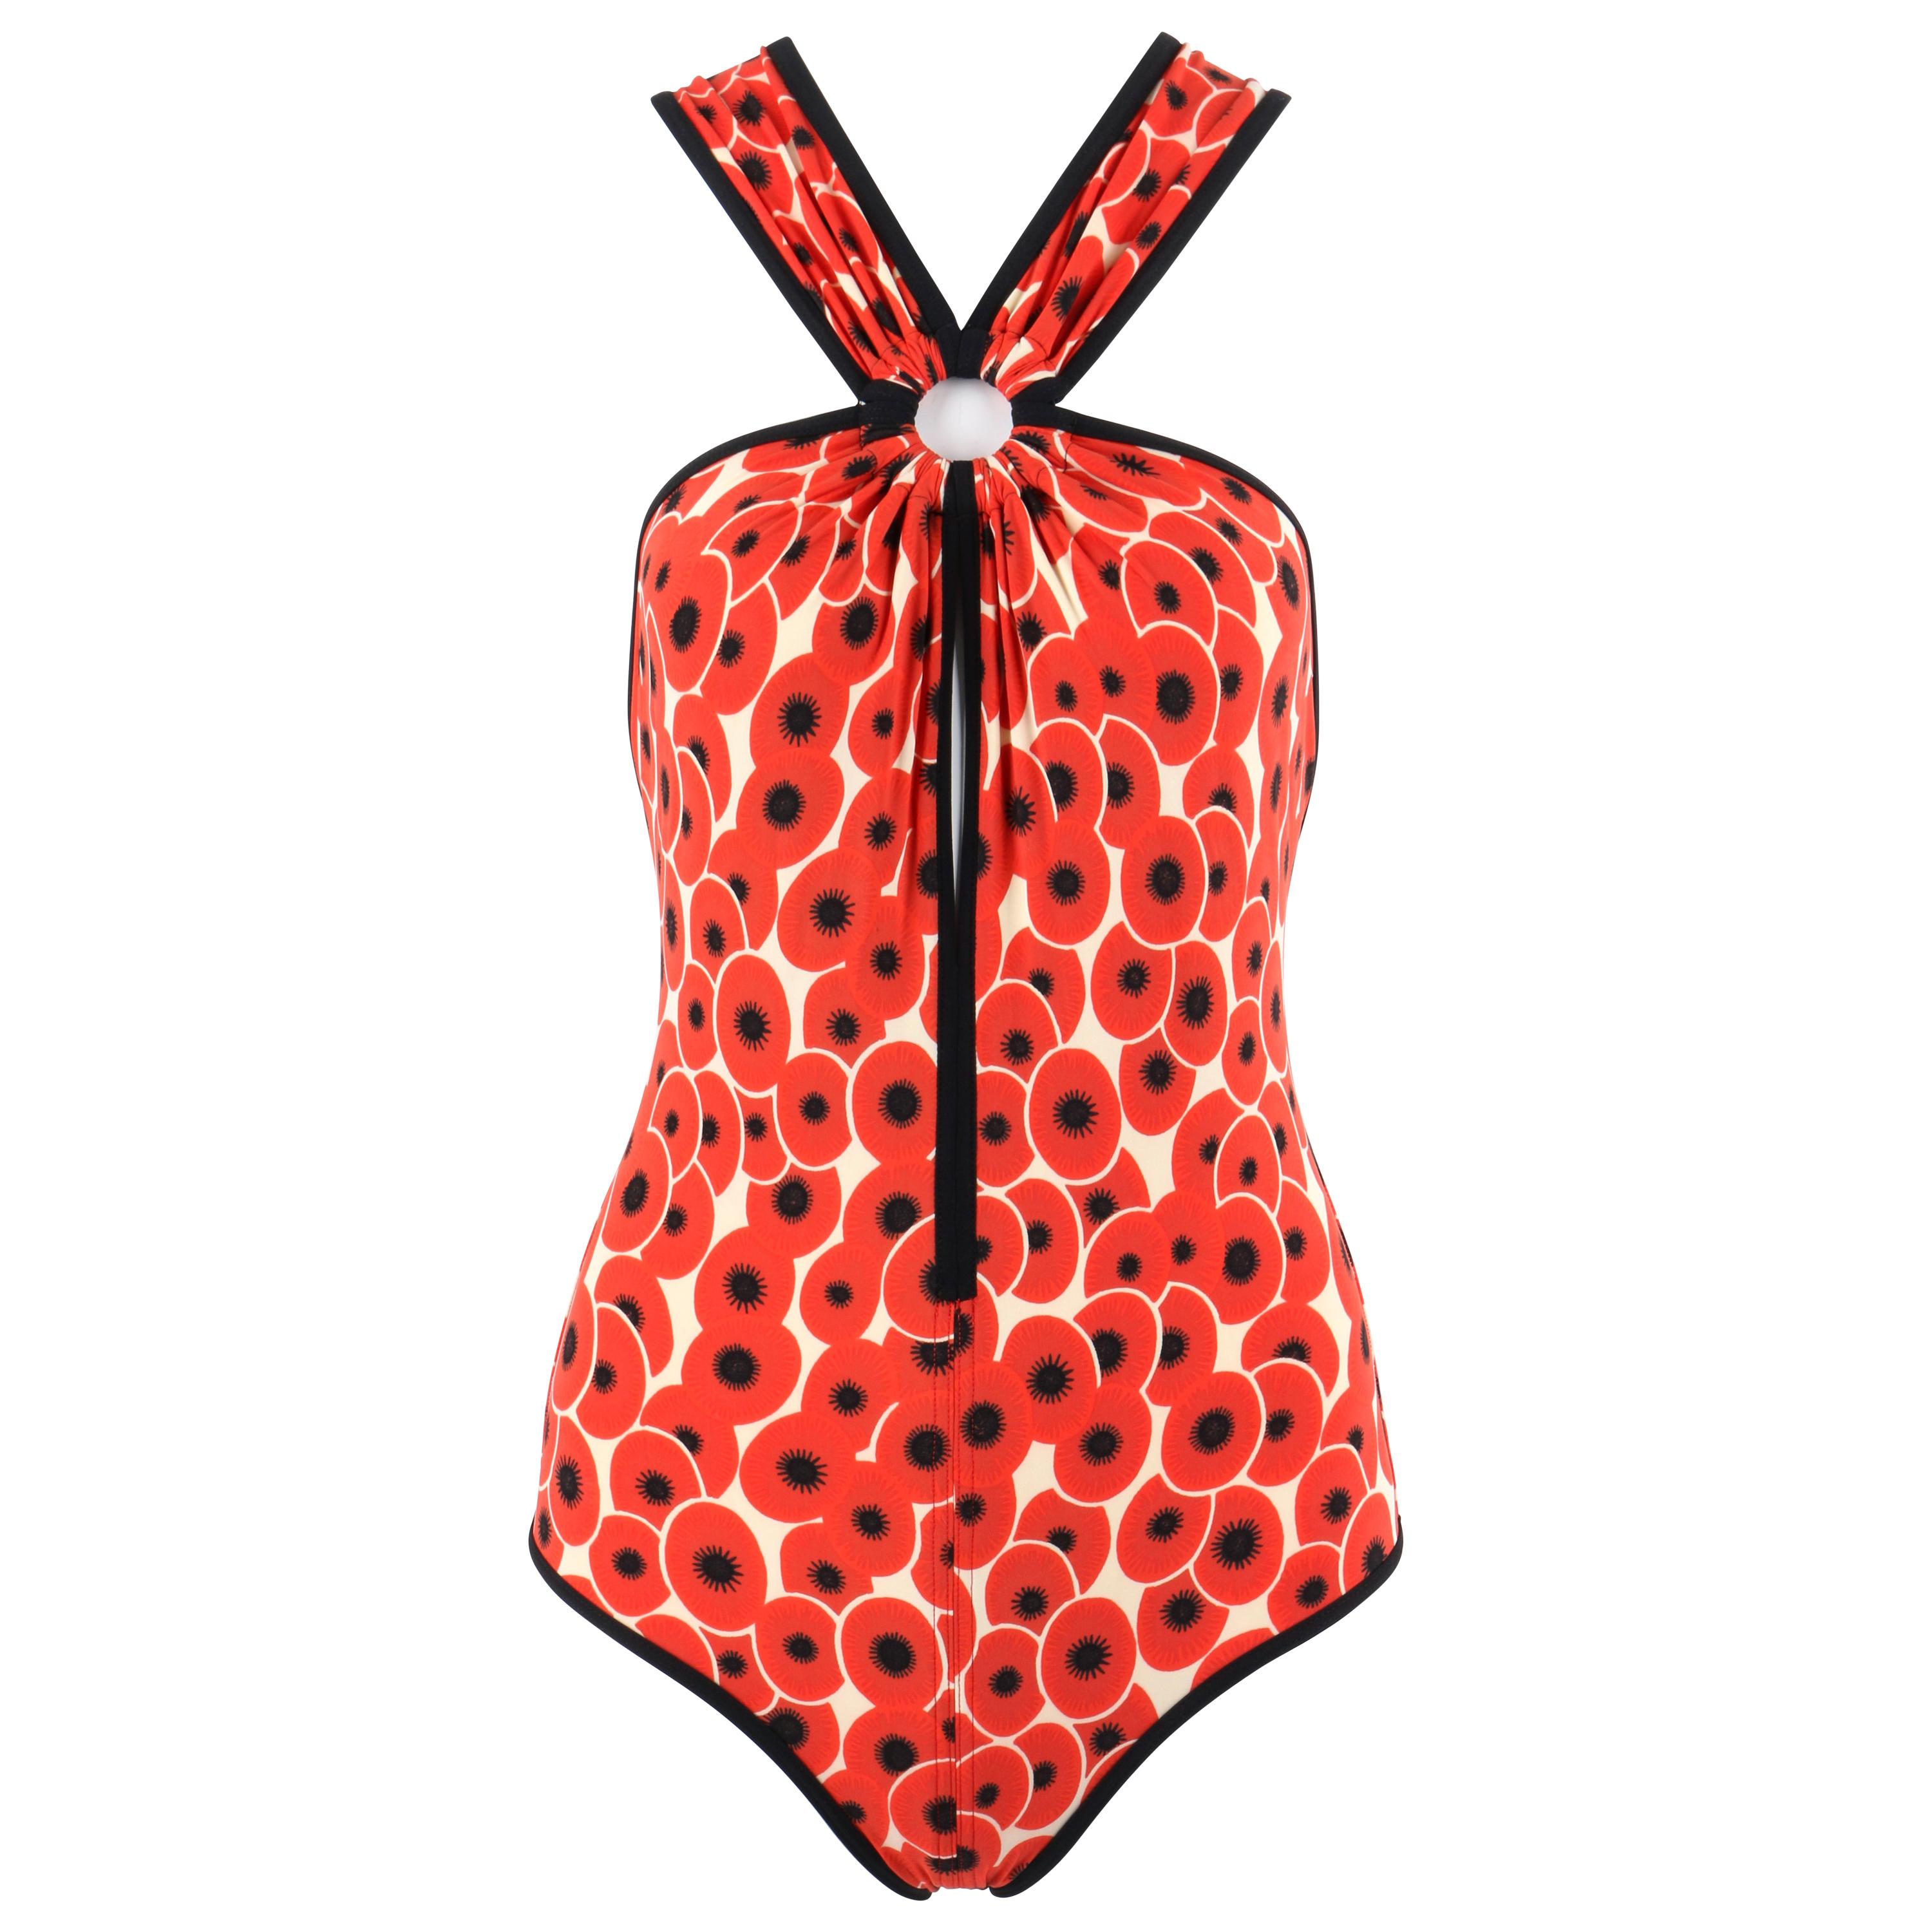 HERMES S/S 2007 Red Poppy Floral Keyhole Halter One-Piece Bathing Suit 